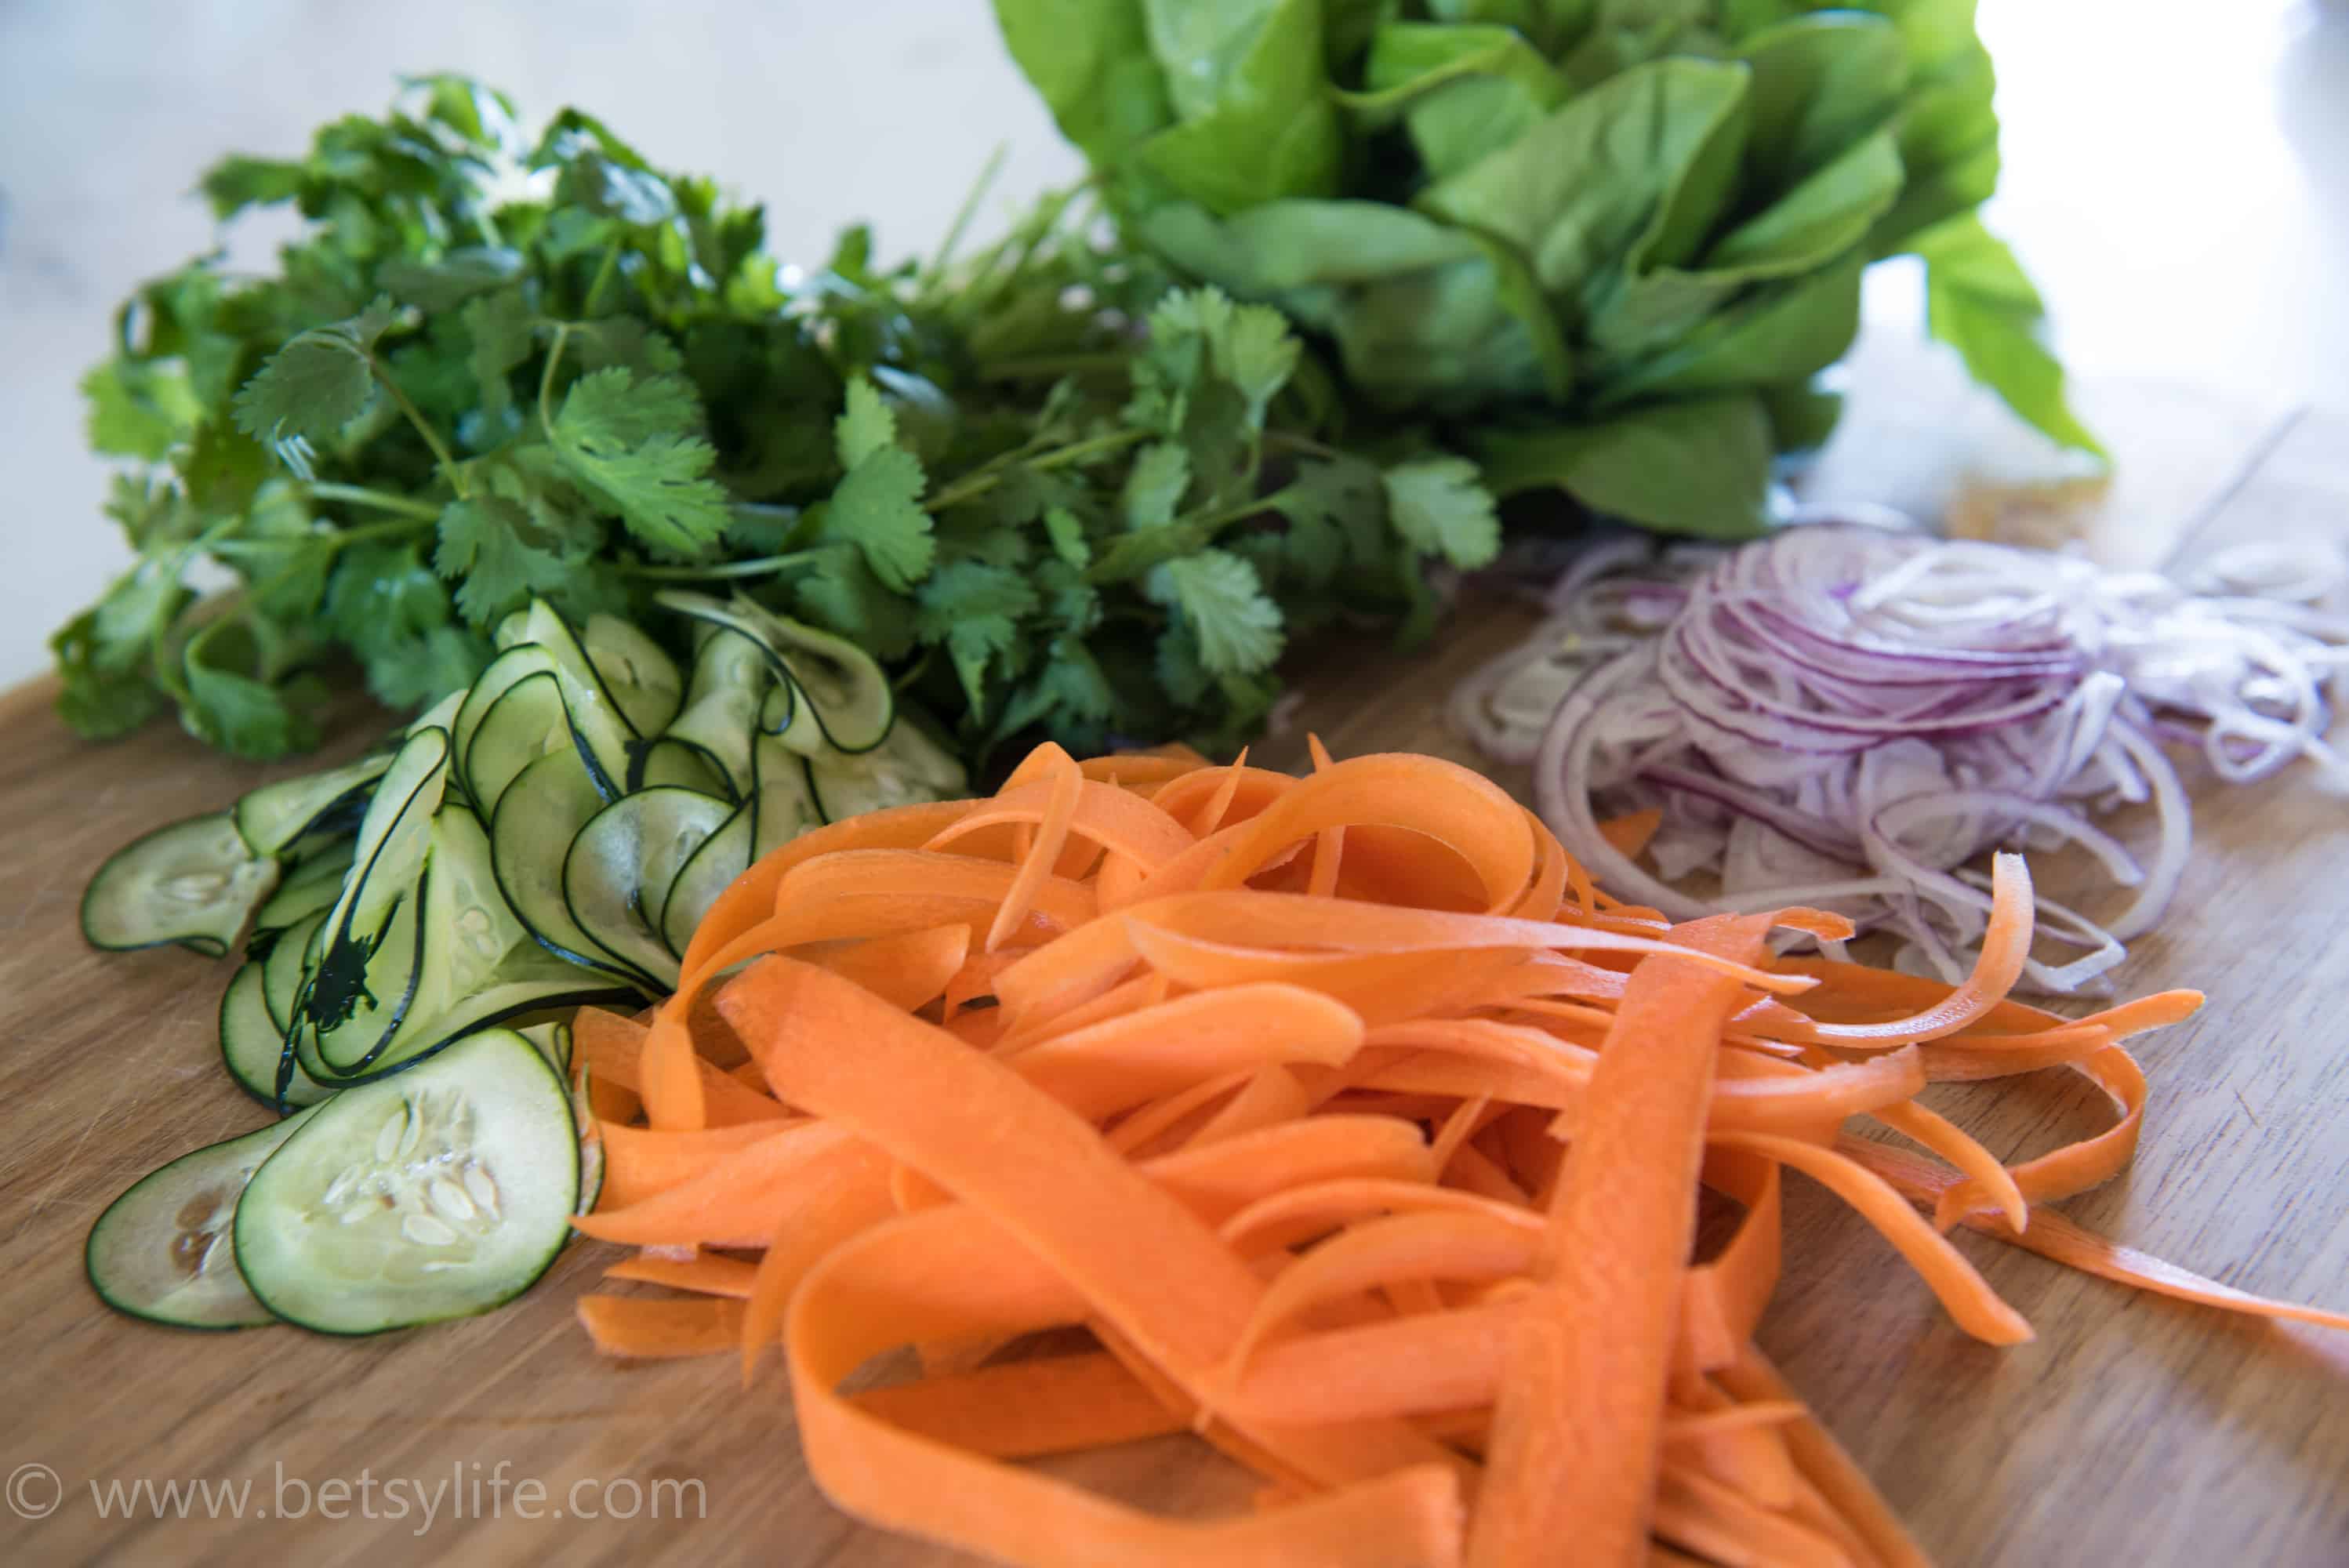 wooden cutting board piled with thinly shredded carrots, cucumber slices, thin slices of red onion, a bunch of cilantro and a head of butter lettuce 